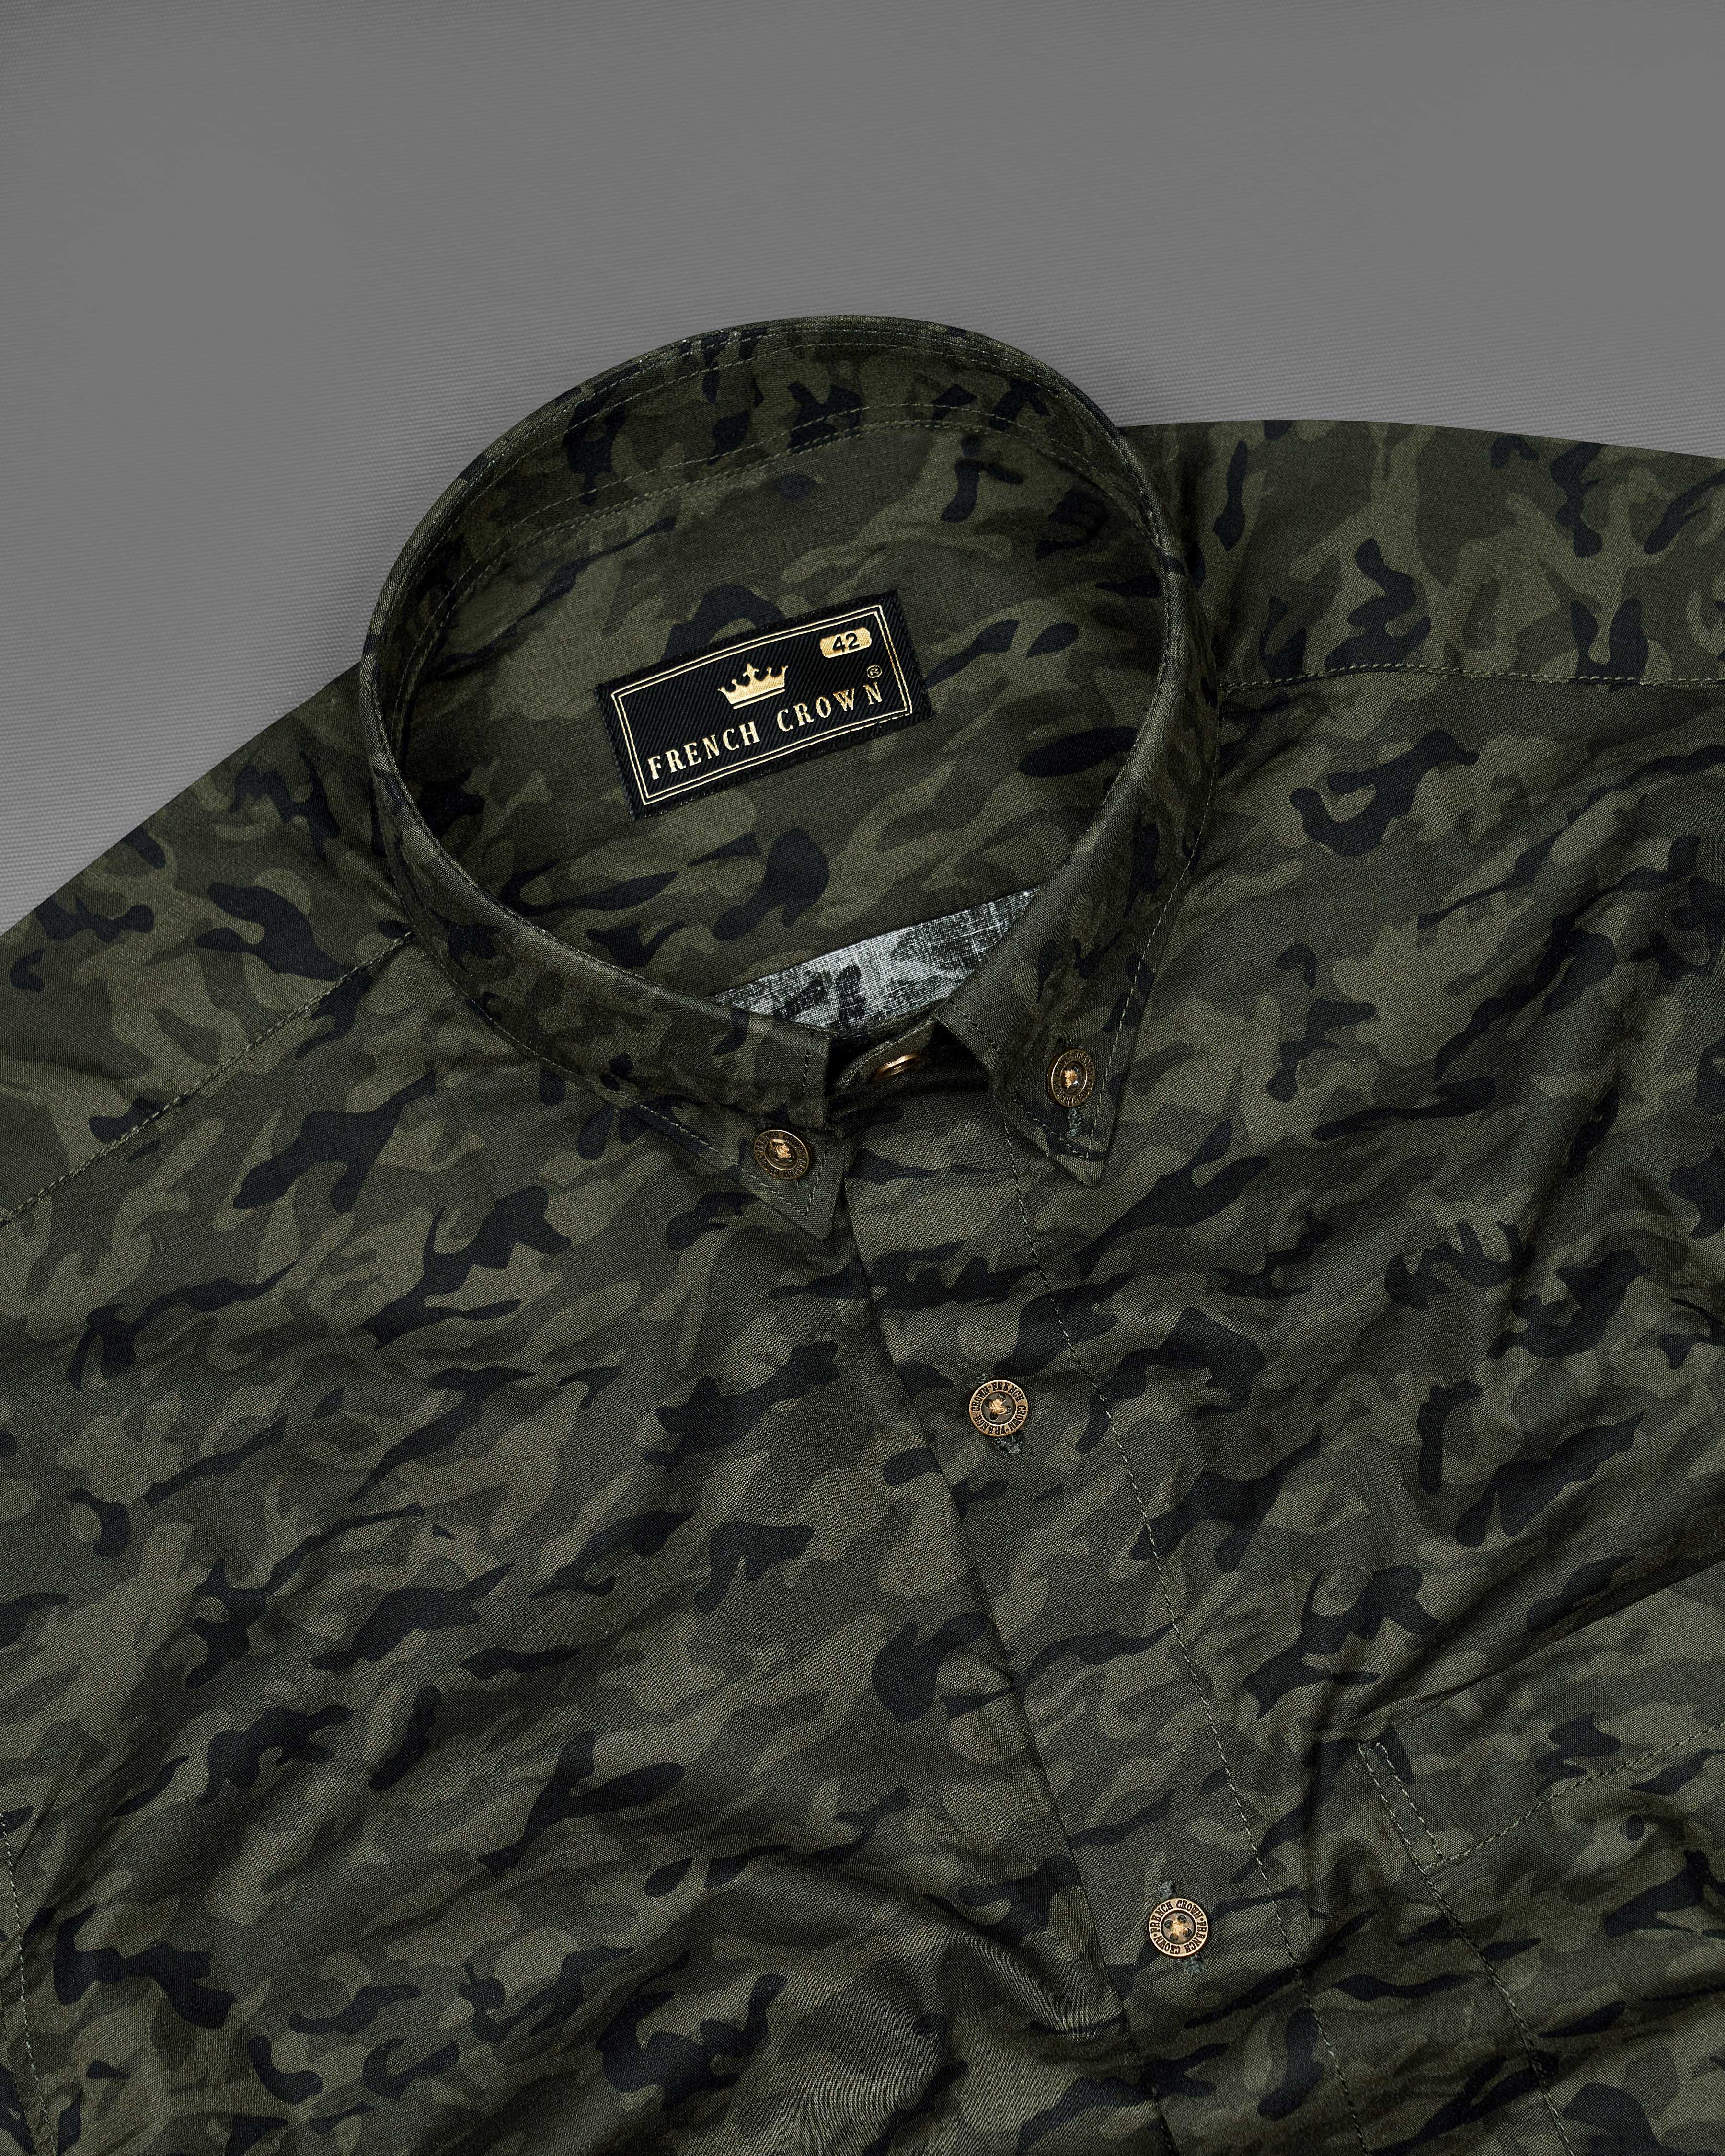 Eternity Green with Mirage Gray Camouflage Printed Premium Cotton Shirt 8916-BD-MB-38, 8916-BD-MB-H-38,  8916-BD-MB-39,  8916-BD-MB-H-39,  8916-BD-MB-40,  8916-BD-MB-H-40,  8916-BD-MB-42,  8916-BD-MB-H-42,  8916-BD-MB-44,  8916-BD-MB-H-44,  8916-BD-MB-46,  8916-BD-MB-H-46,  8916-BD-MB-48,  8916-BD-MB-H-48,  8916-BD-MB-50,  8916-BD-MB-H-50,  8916-BD-MB-52,  8916-BD-MB-H-52